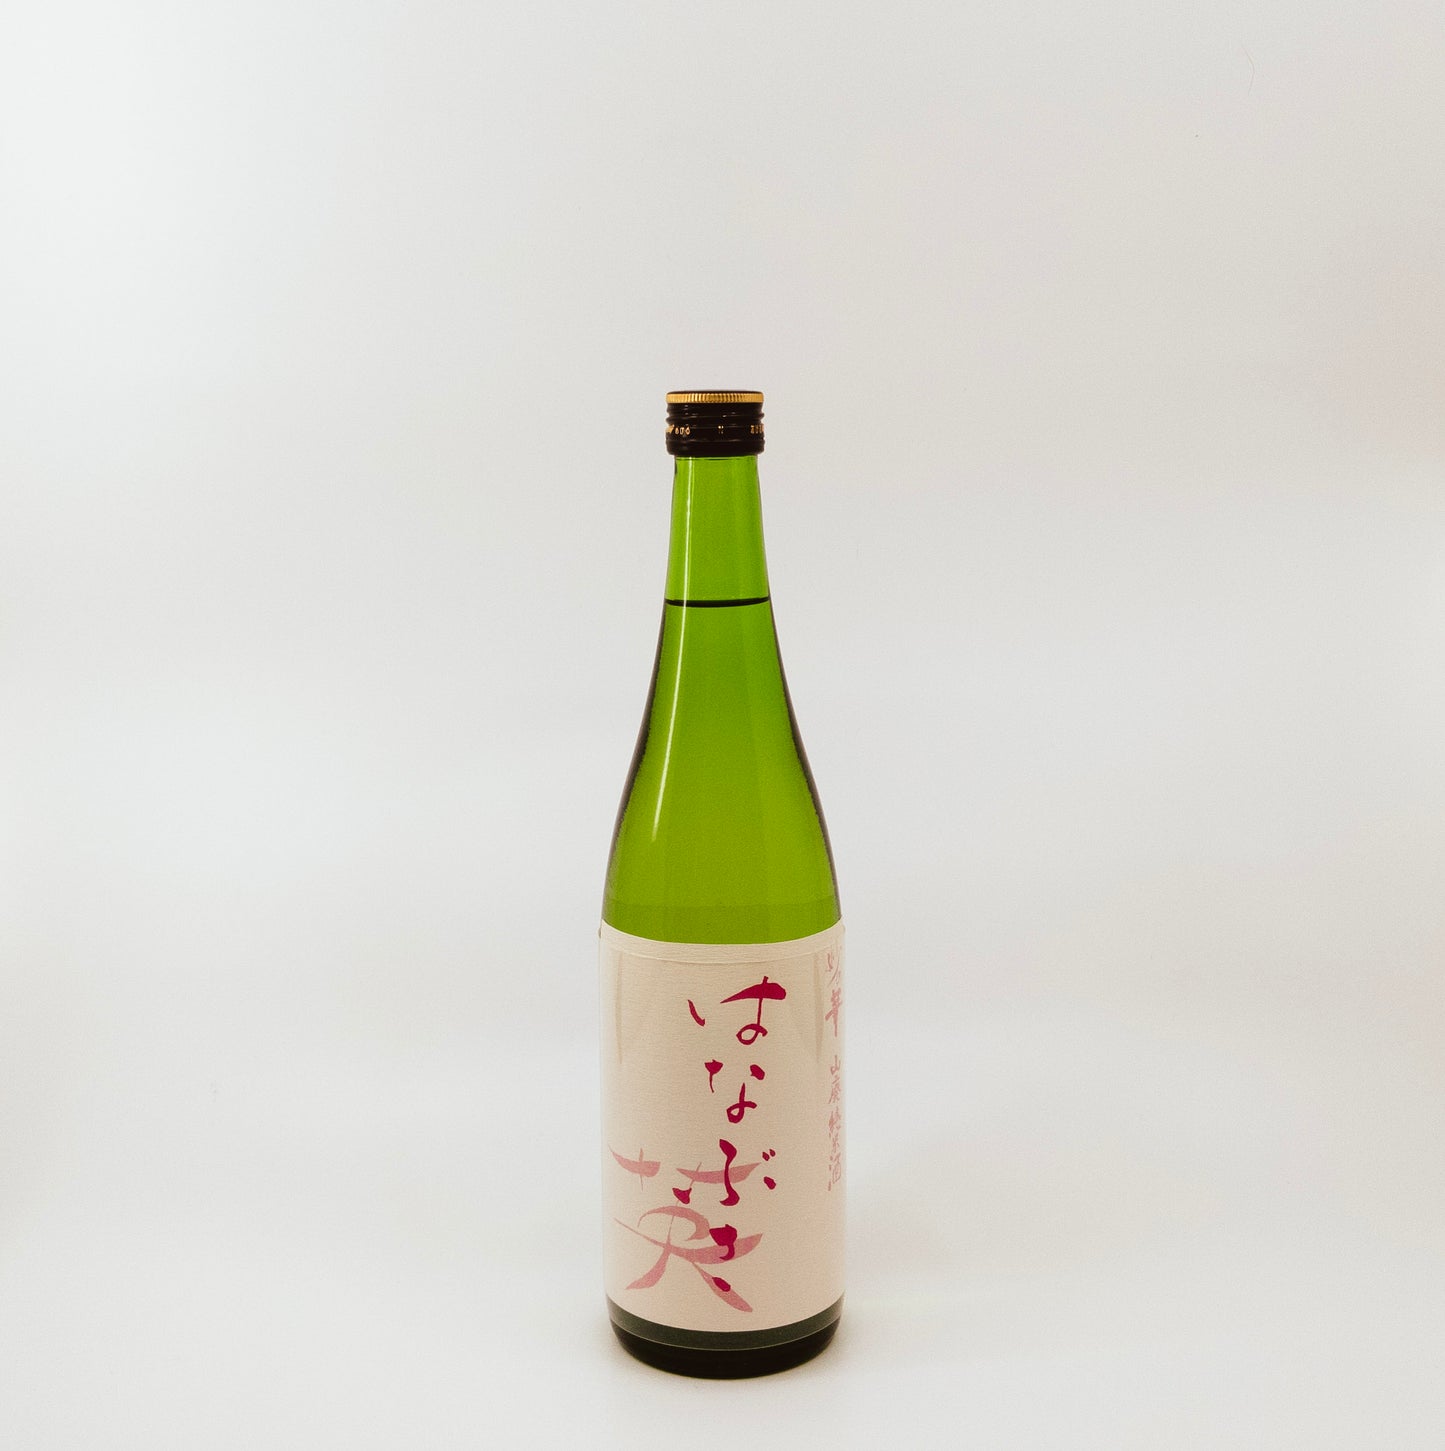 green glass bottle with red writing on cream label